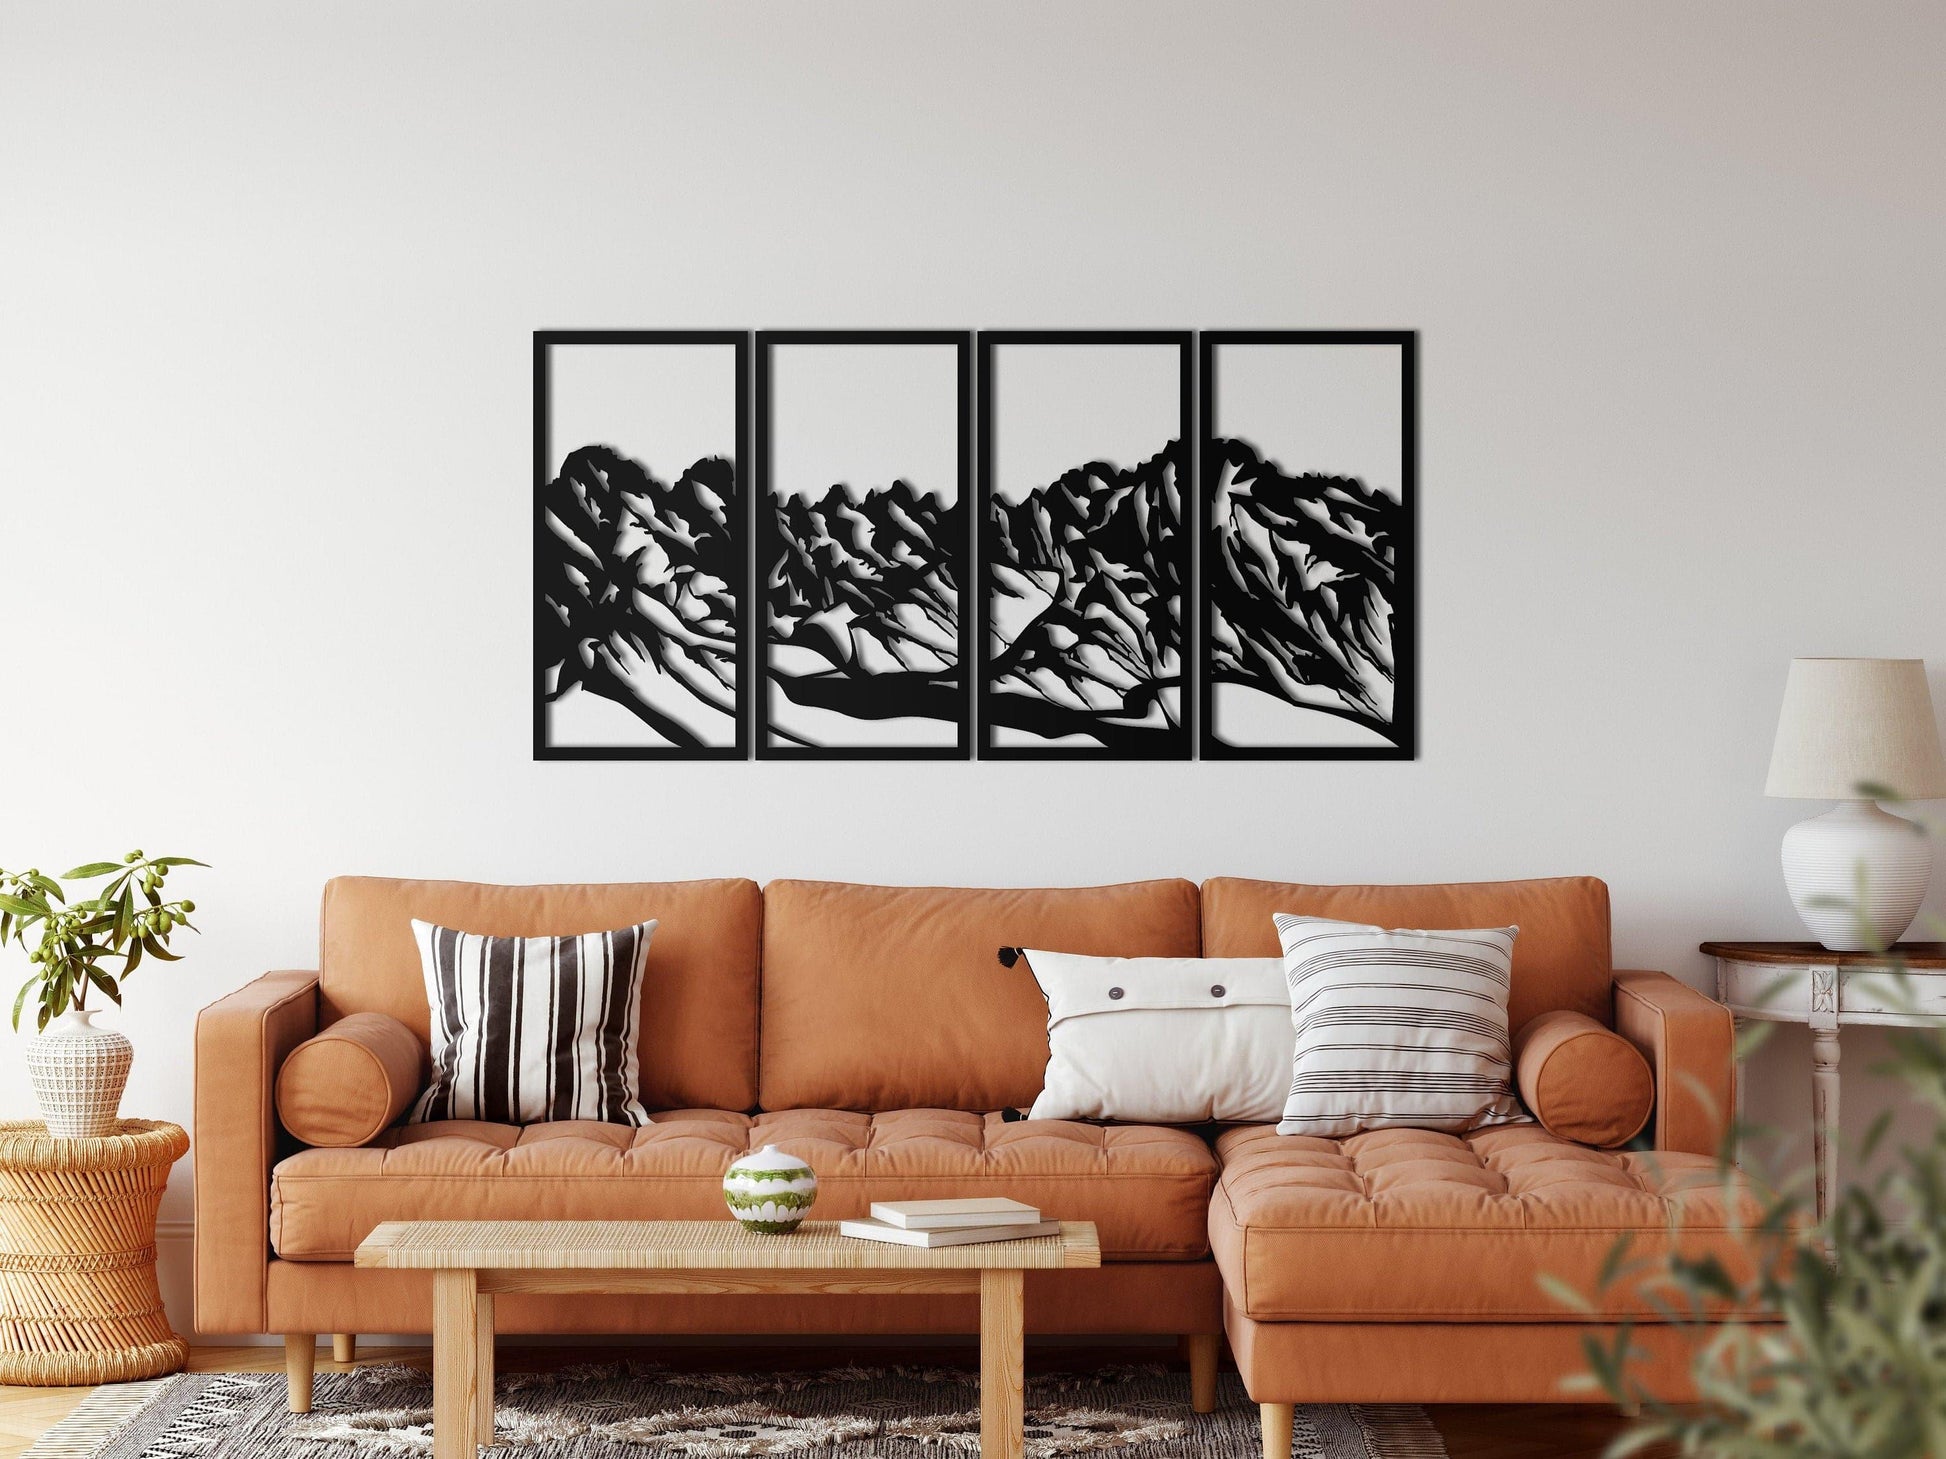 4 Panel Mountain Landscape Metal Wall Hangings - MAIA HOMES